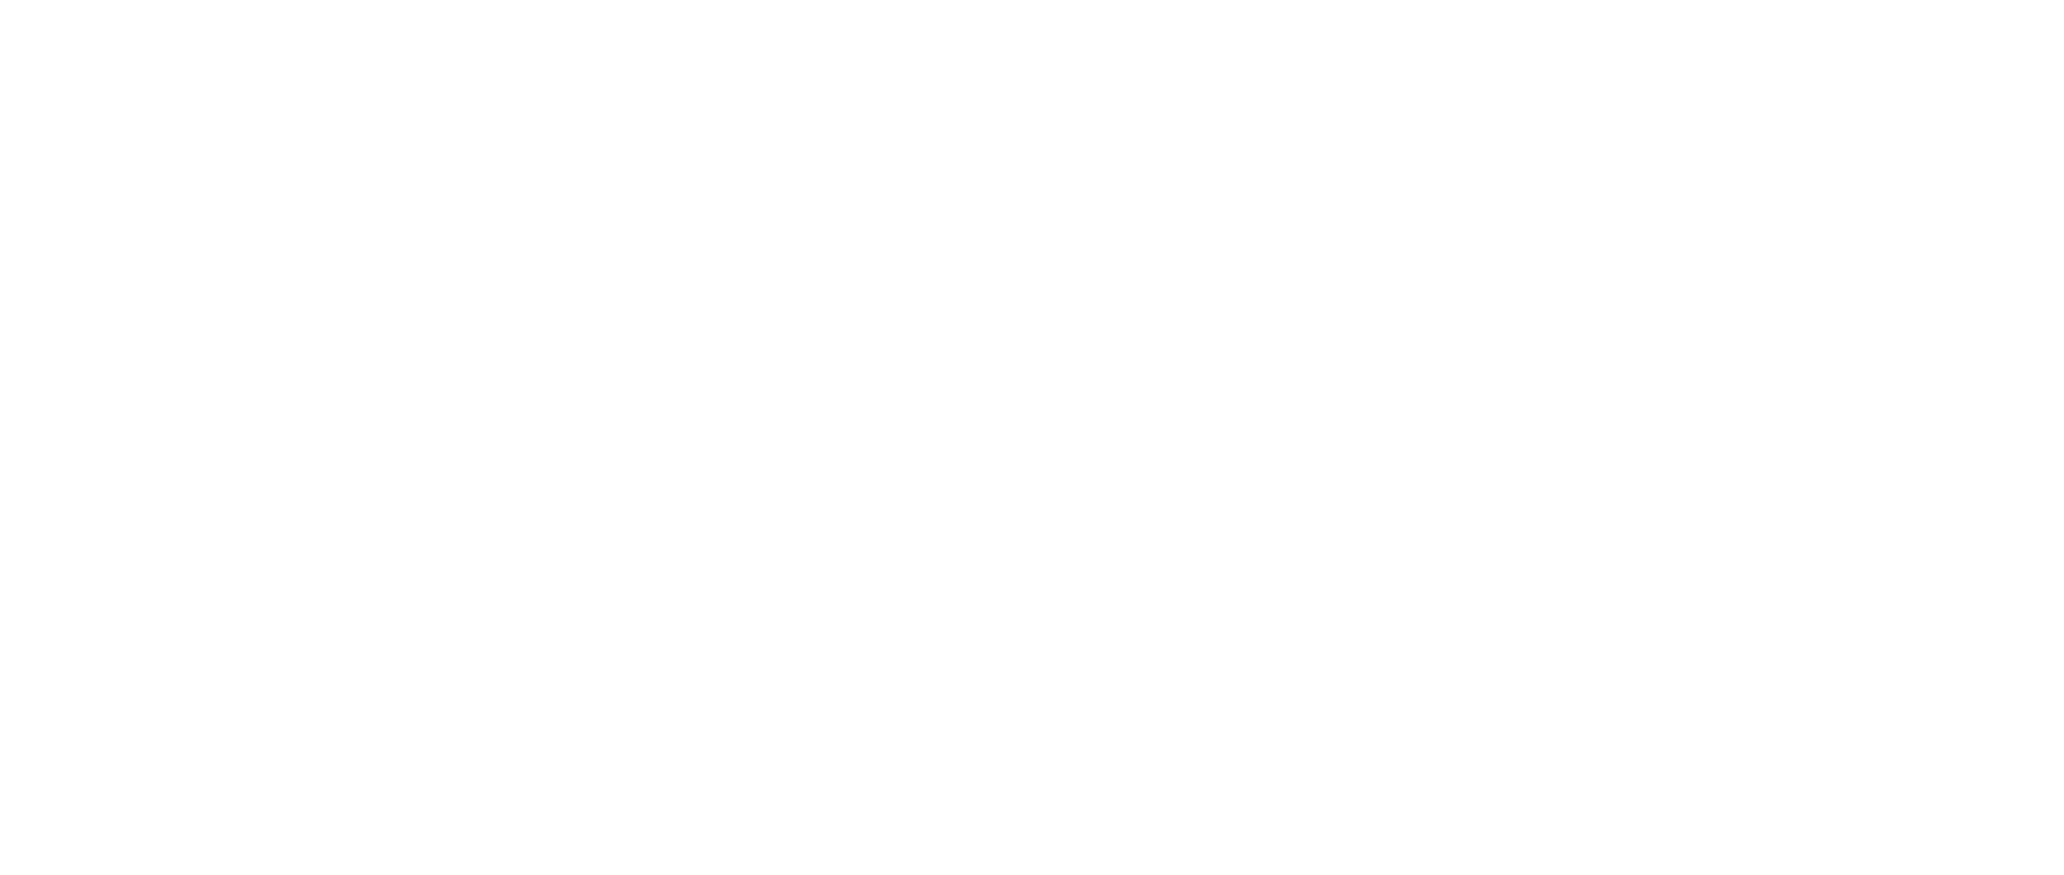 Visionary Fragment Group